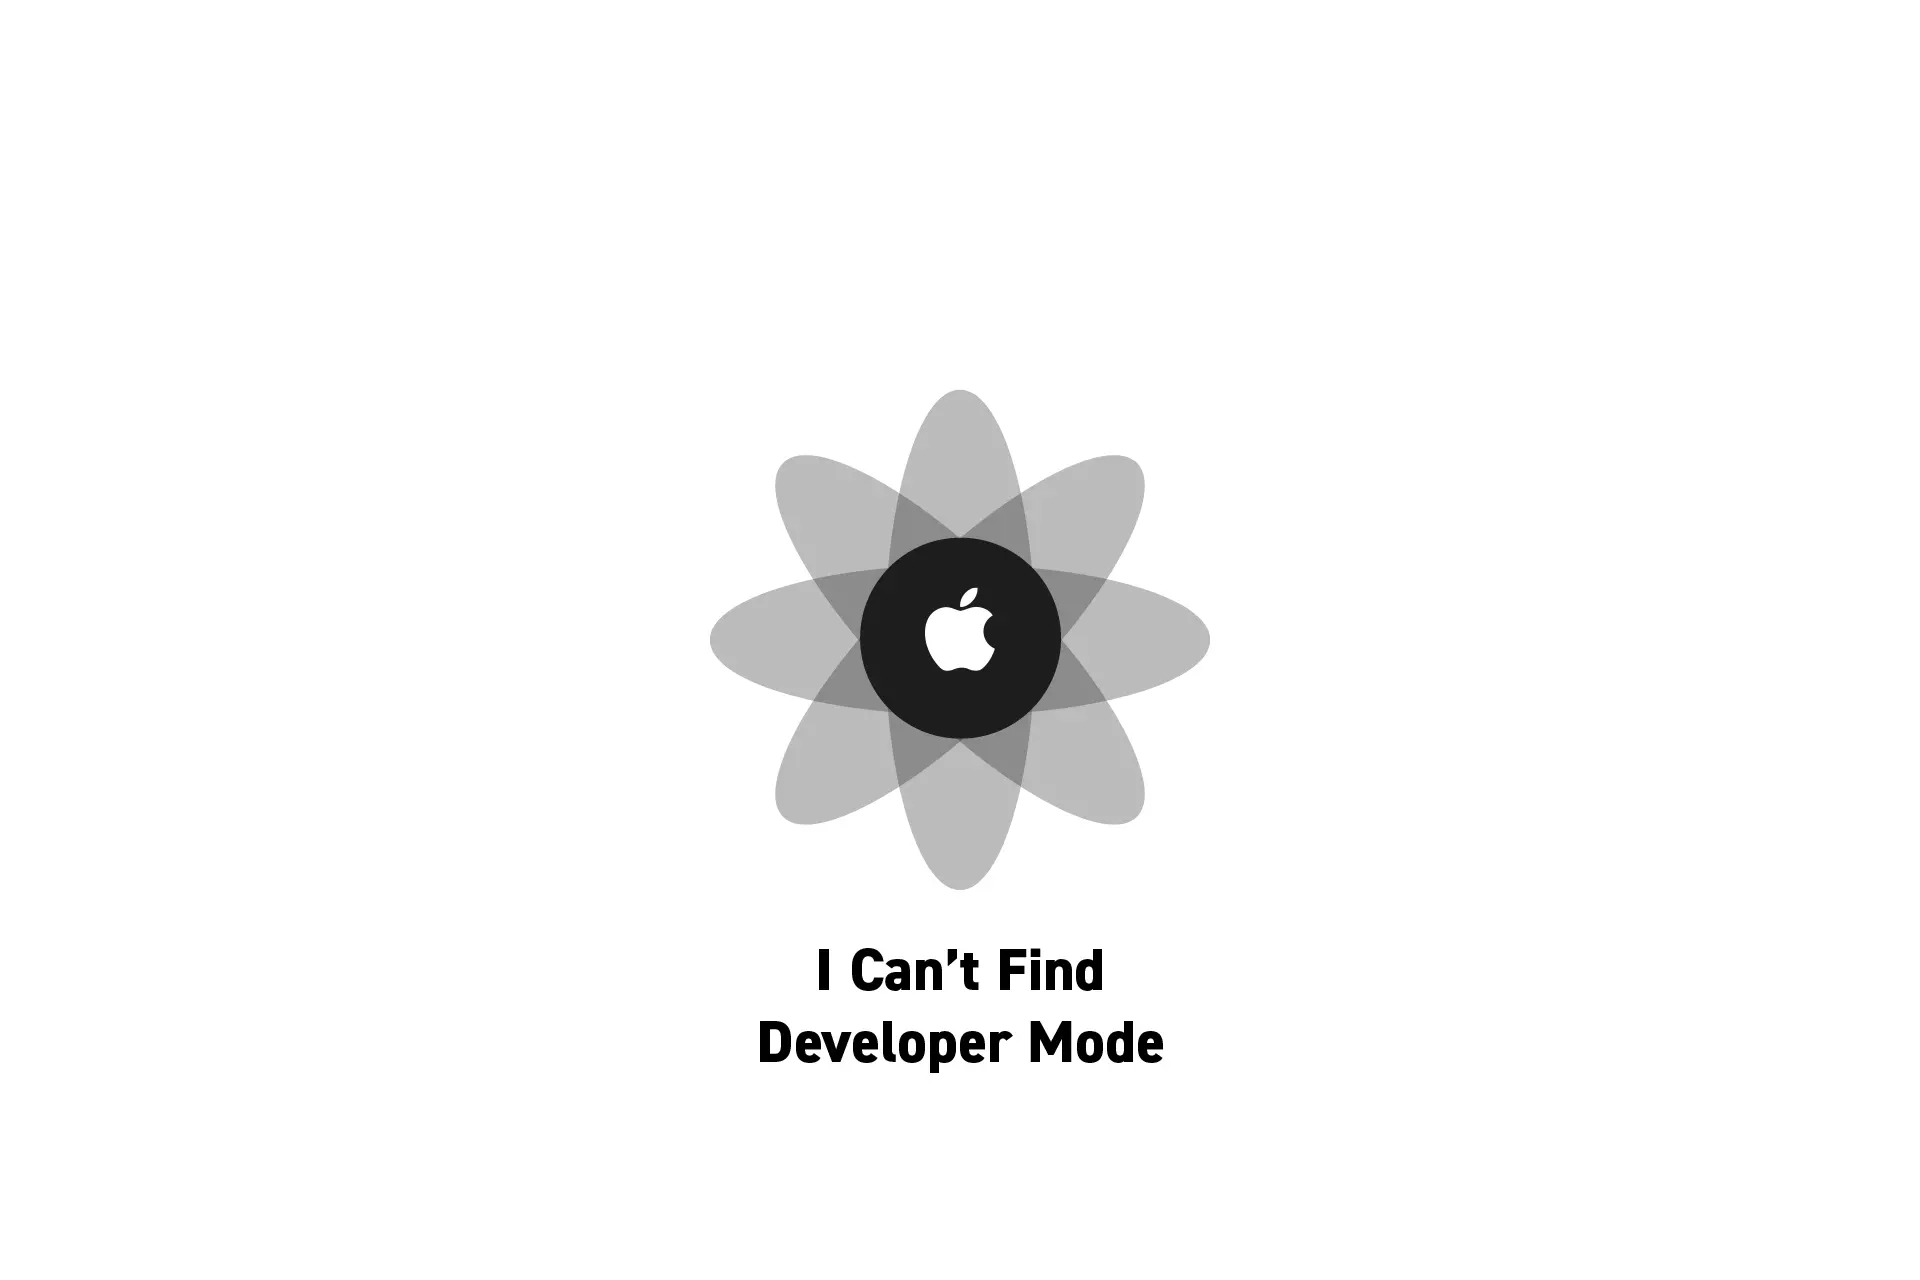 A flower that represents Apple with the text "I Can’t Find Developer Mode" beneath it.